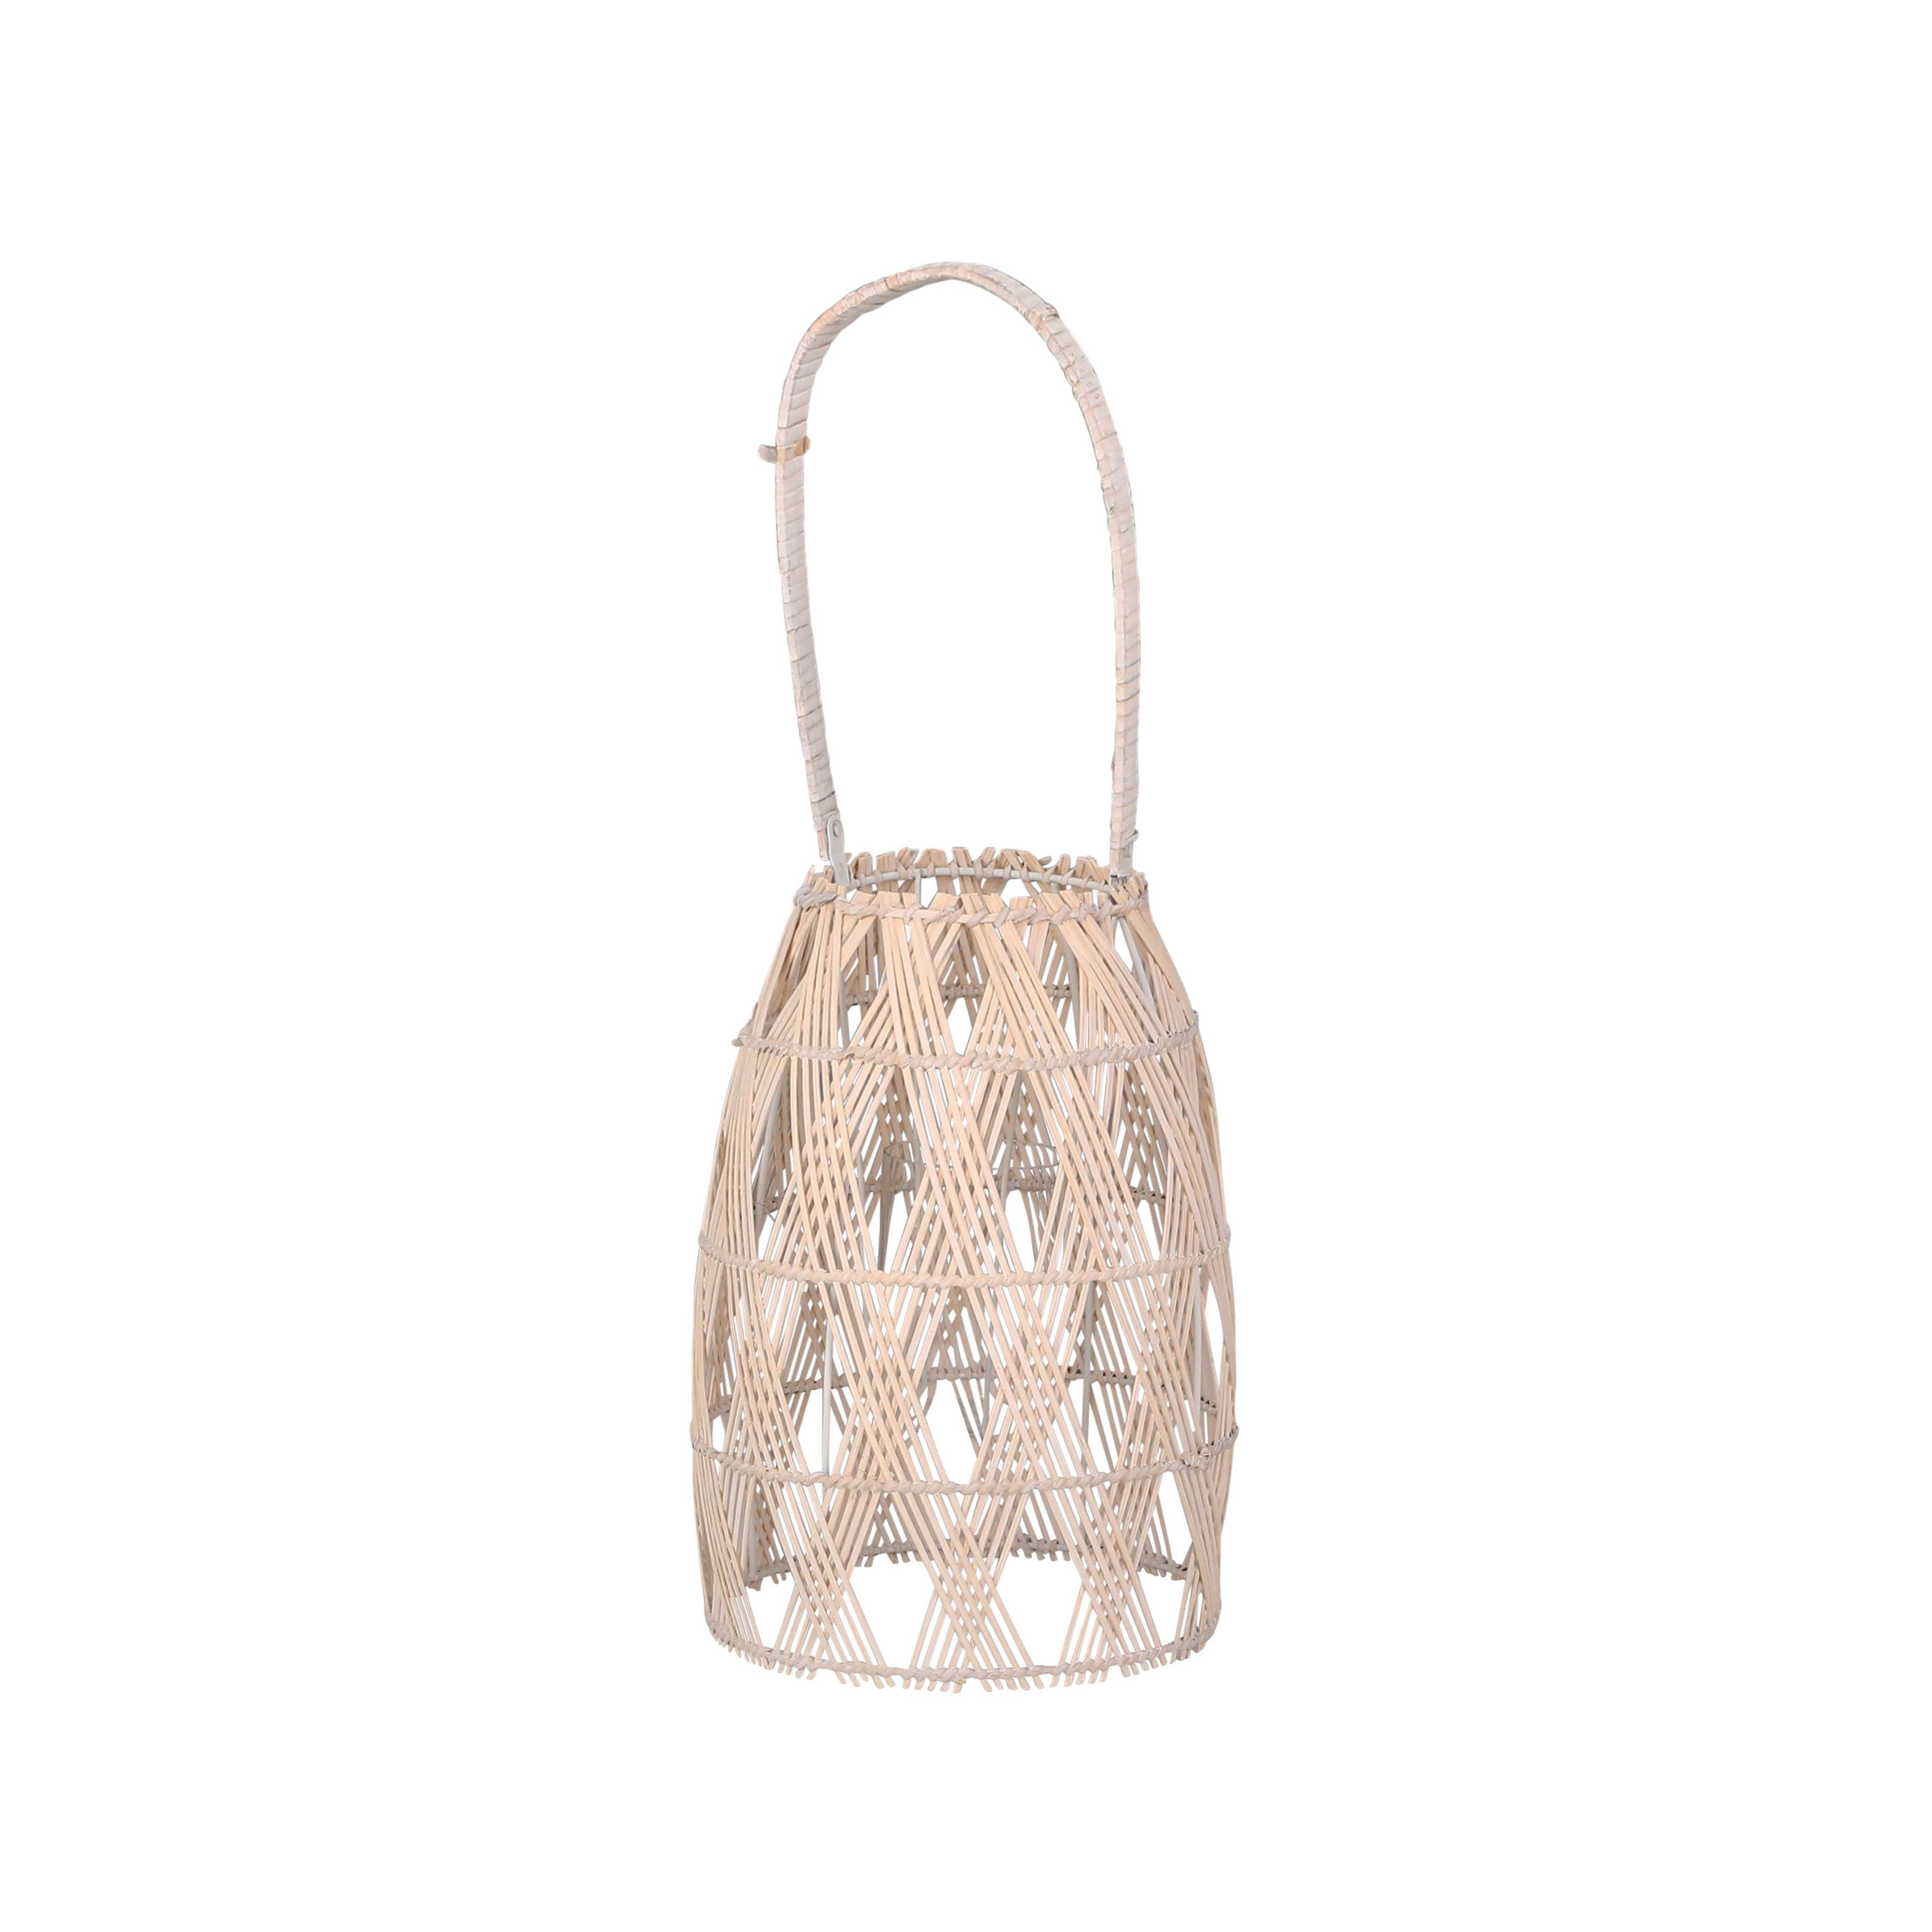 Woven Bamboo Wall Hanging Lantern with X Shaped Binding, Large, Beige